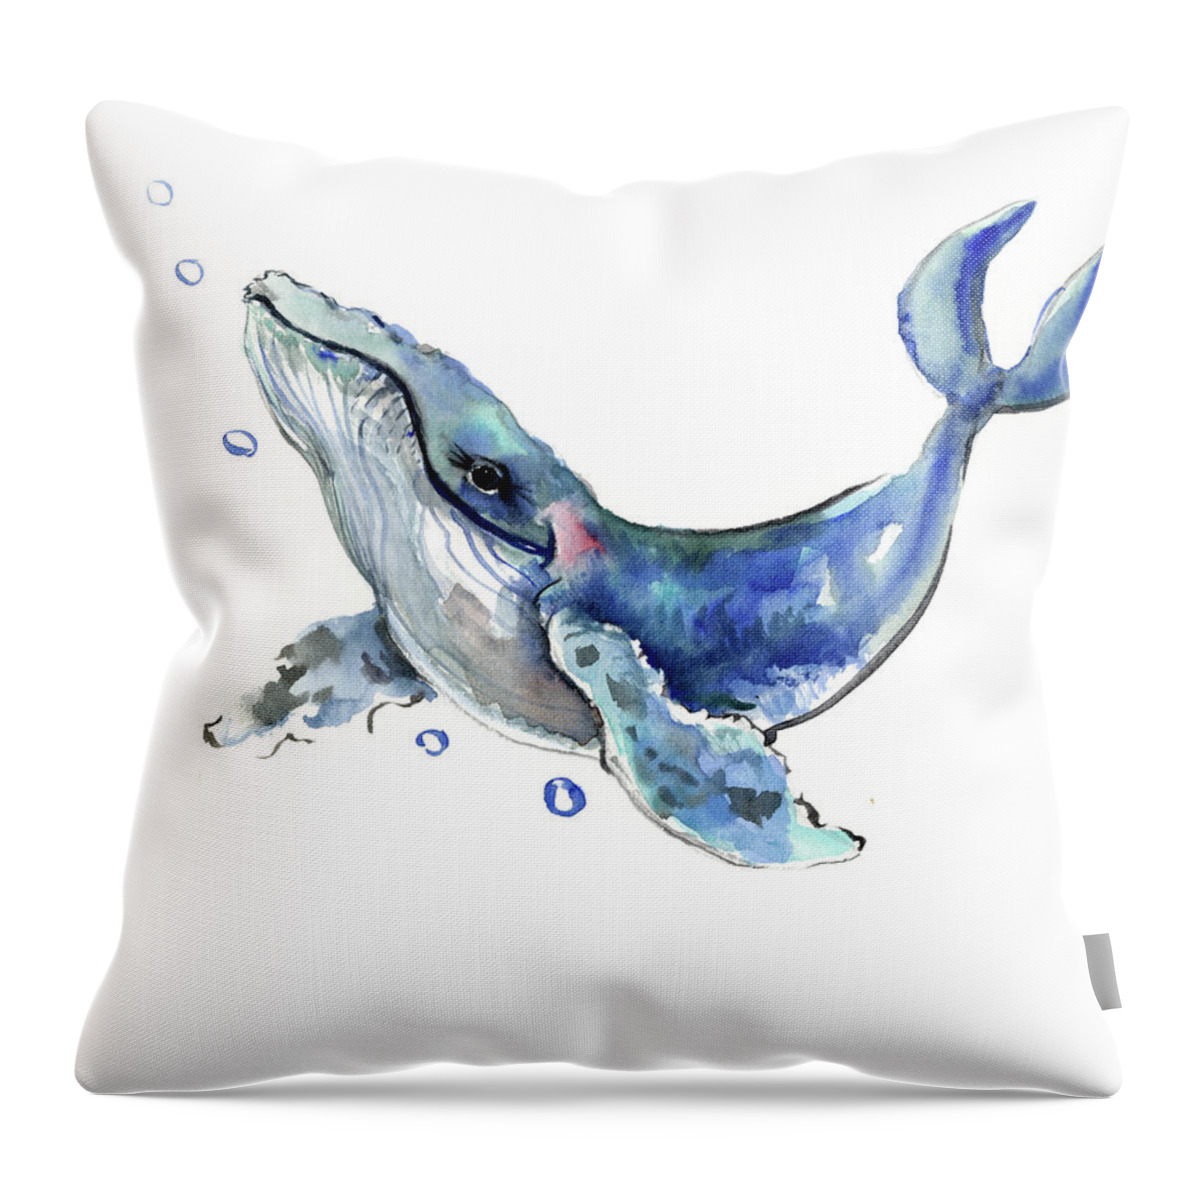 Whale Throw Pillow featuring the painting Humpback Whale #1 by Suren Nersisyan